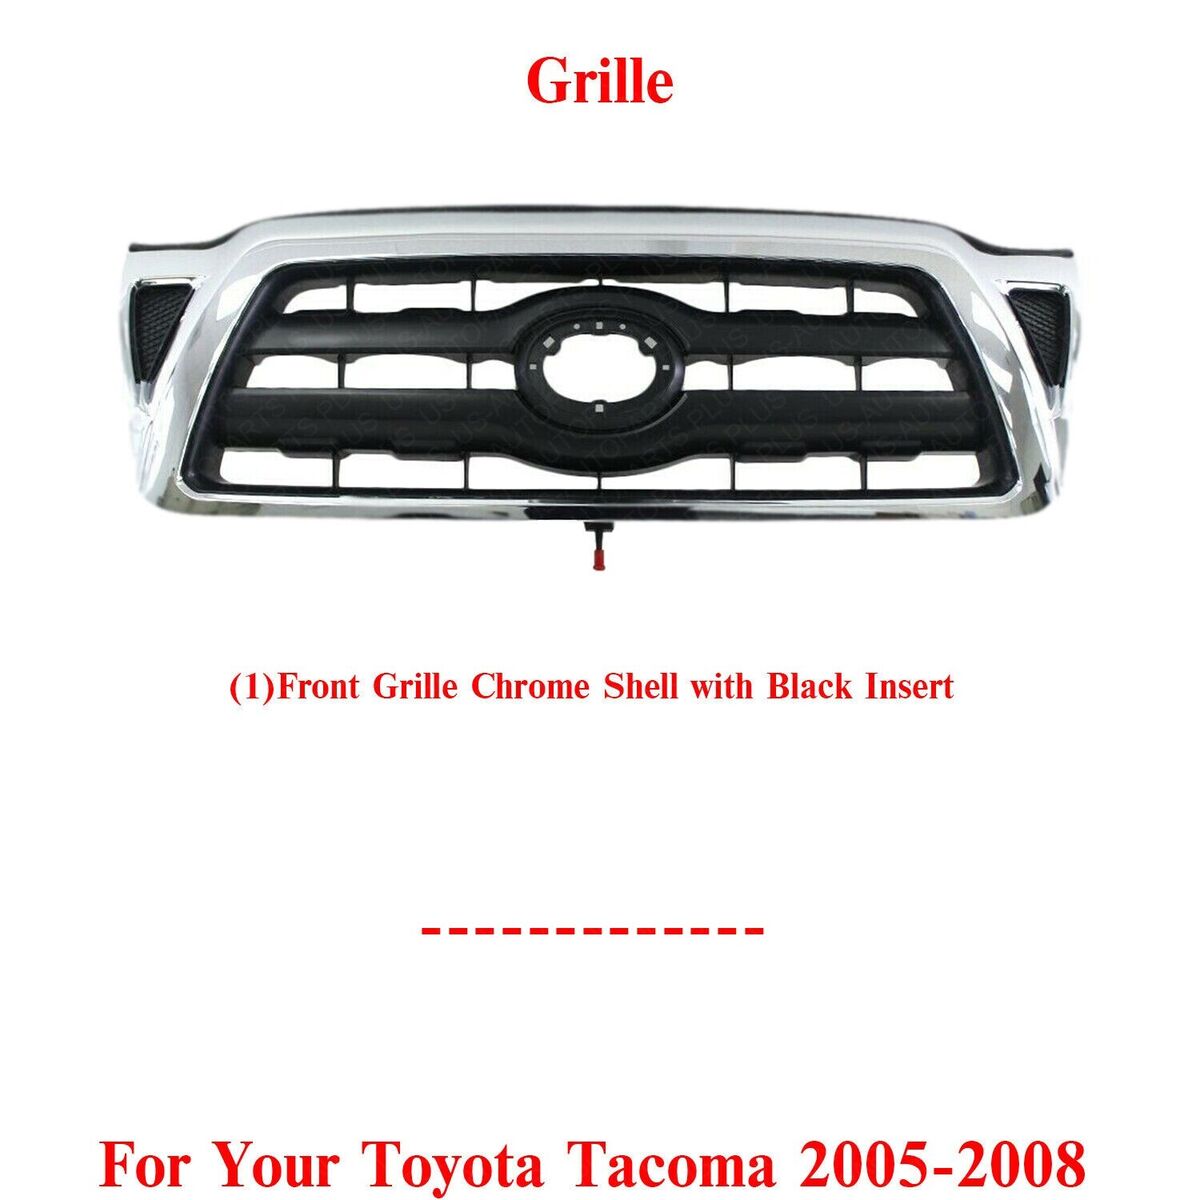 Front Grille Chrome Shell With Black Insert For 2005-2008 Toyota